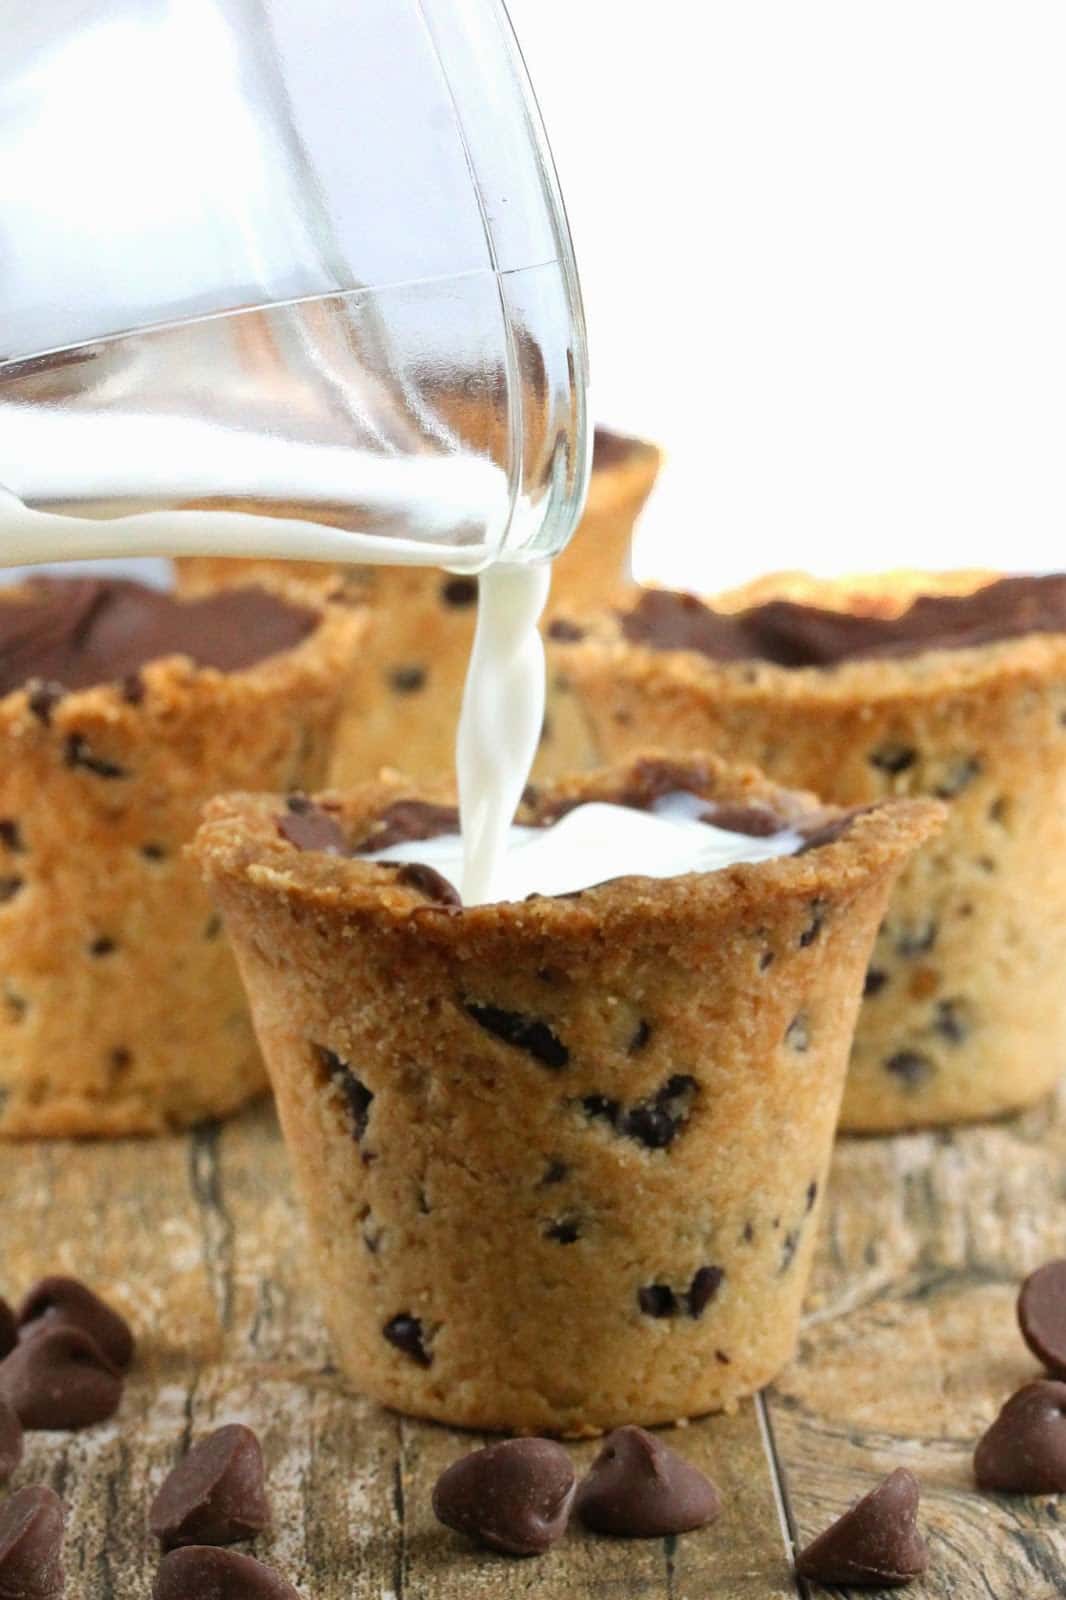 Milk is poured into a cookie shaped into a shot glass that is lined with milk chocolate. Chocolate chips scattered in foreground